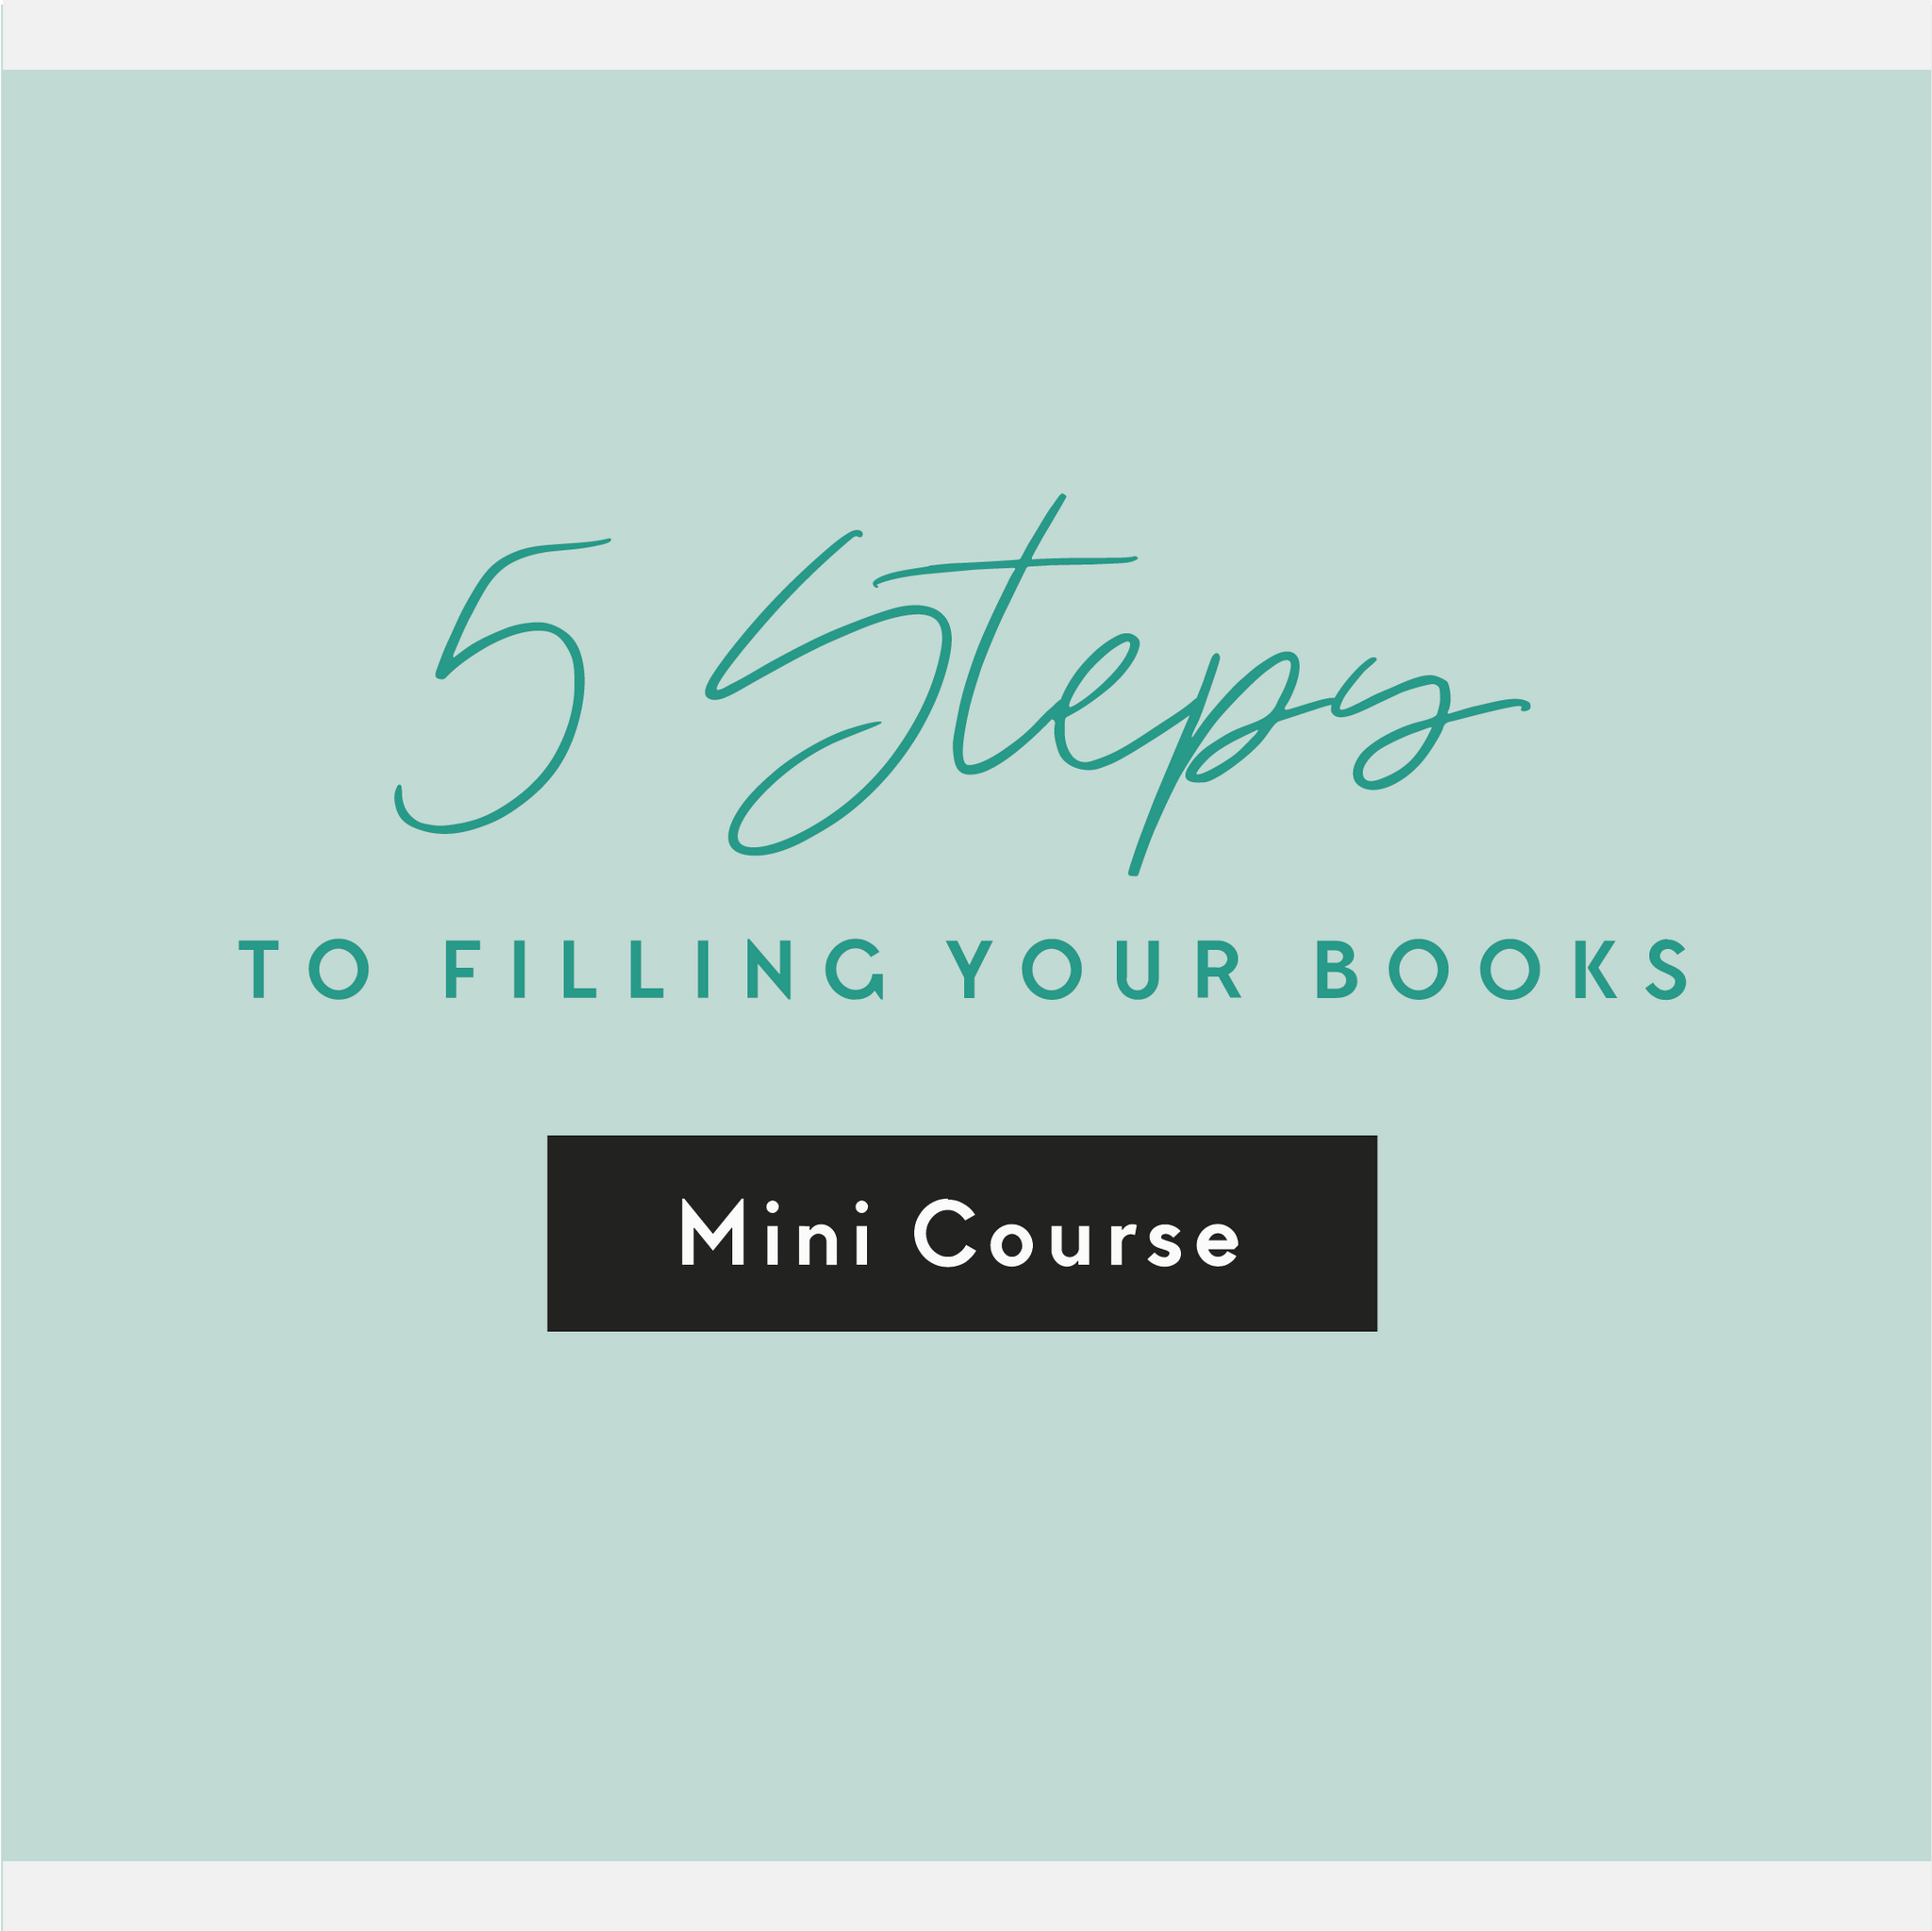 5 Steps To Filling Your Books.